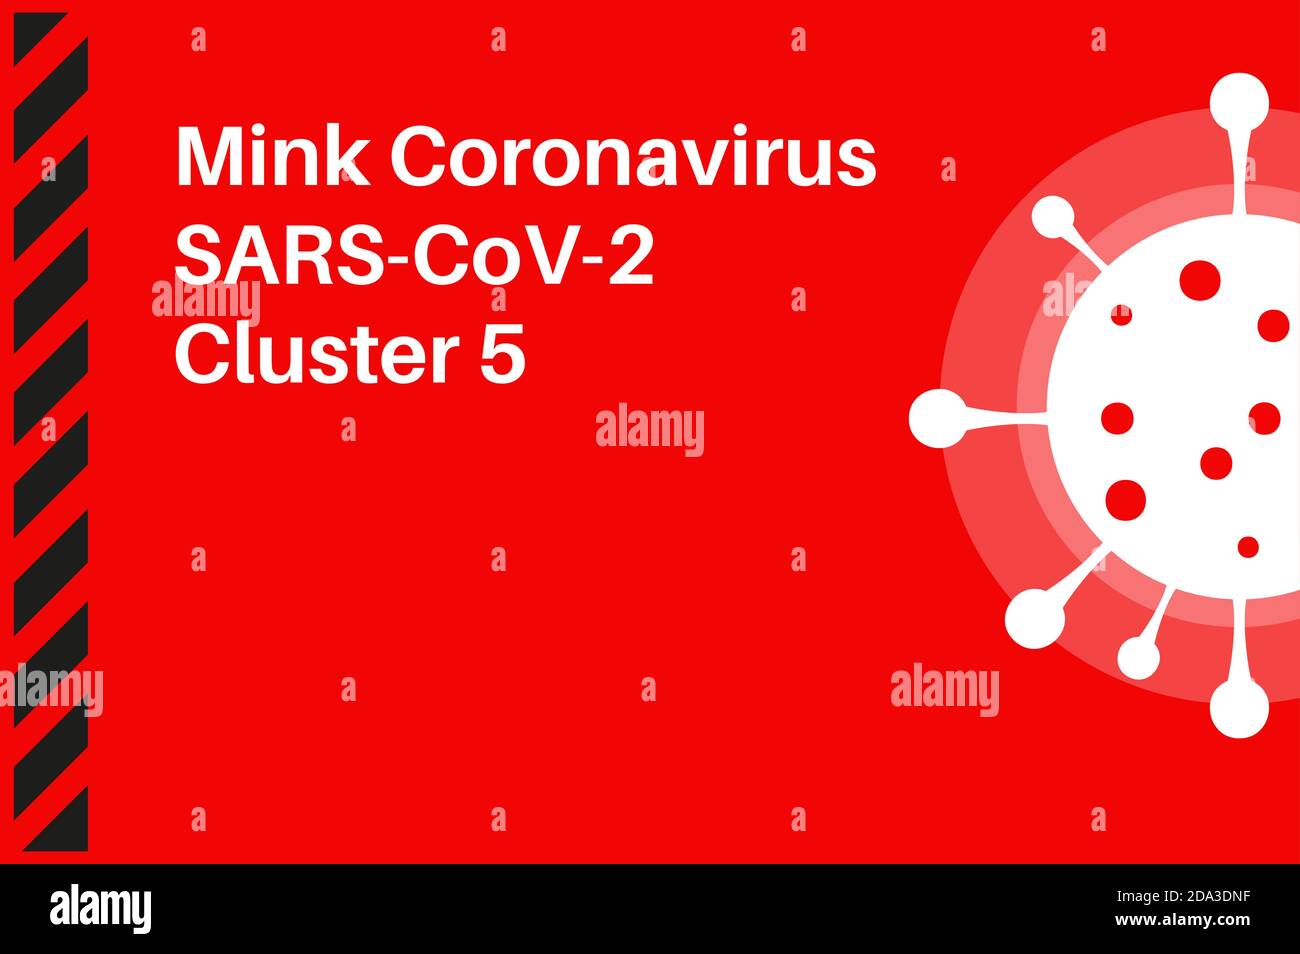 Mink coronavirus SARS-COV-2 Cluster 5 vector illustration on a red background with a virus logo Stock Vector